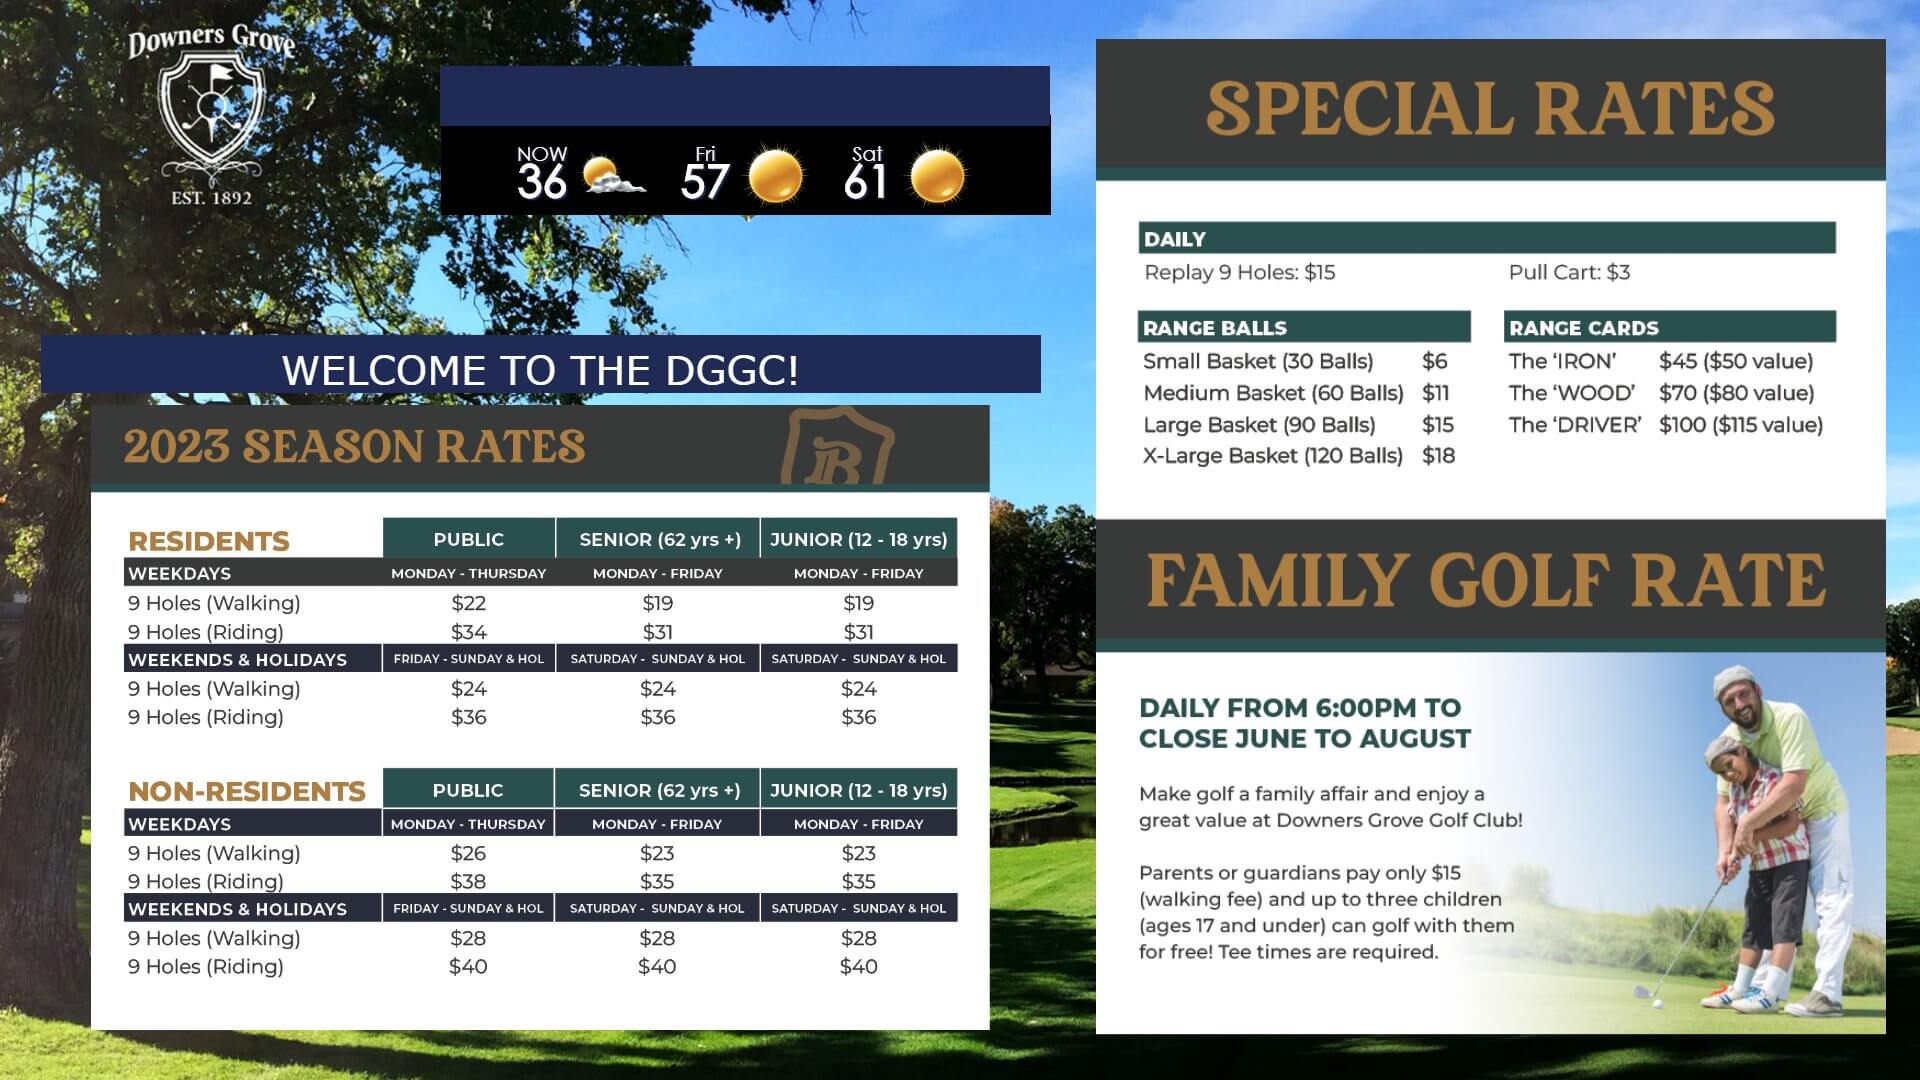 The image shows a digital signage layout for Downers Grove Golf Course season golf course rates, special rates, and family golf rates. 